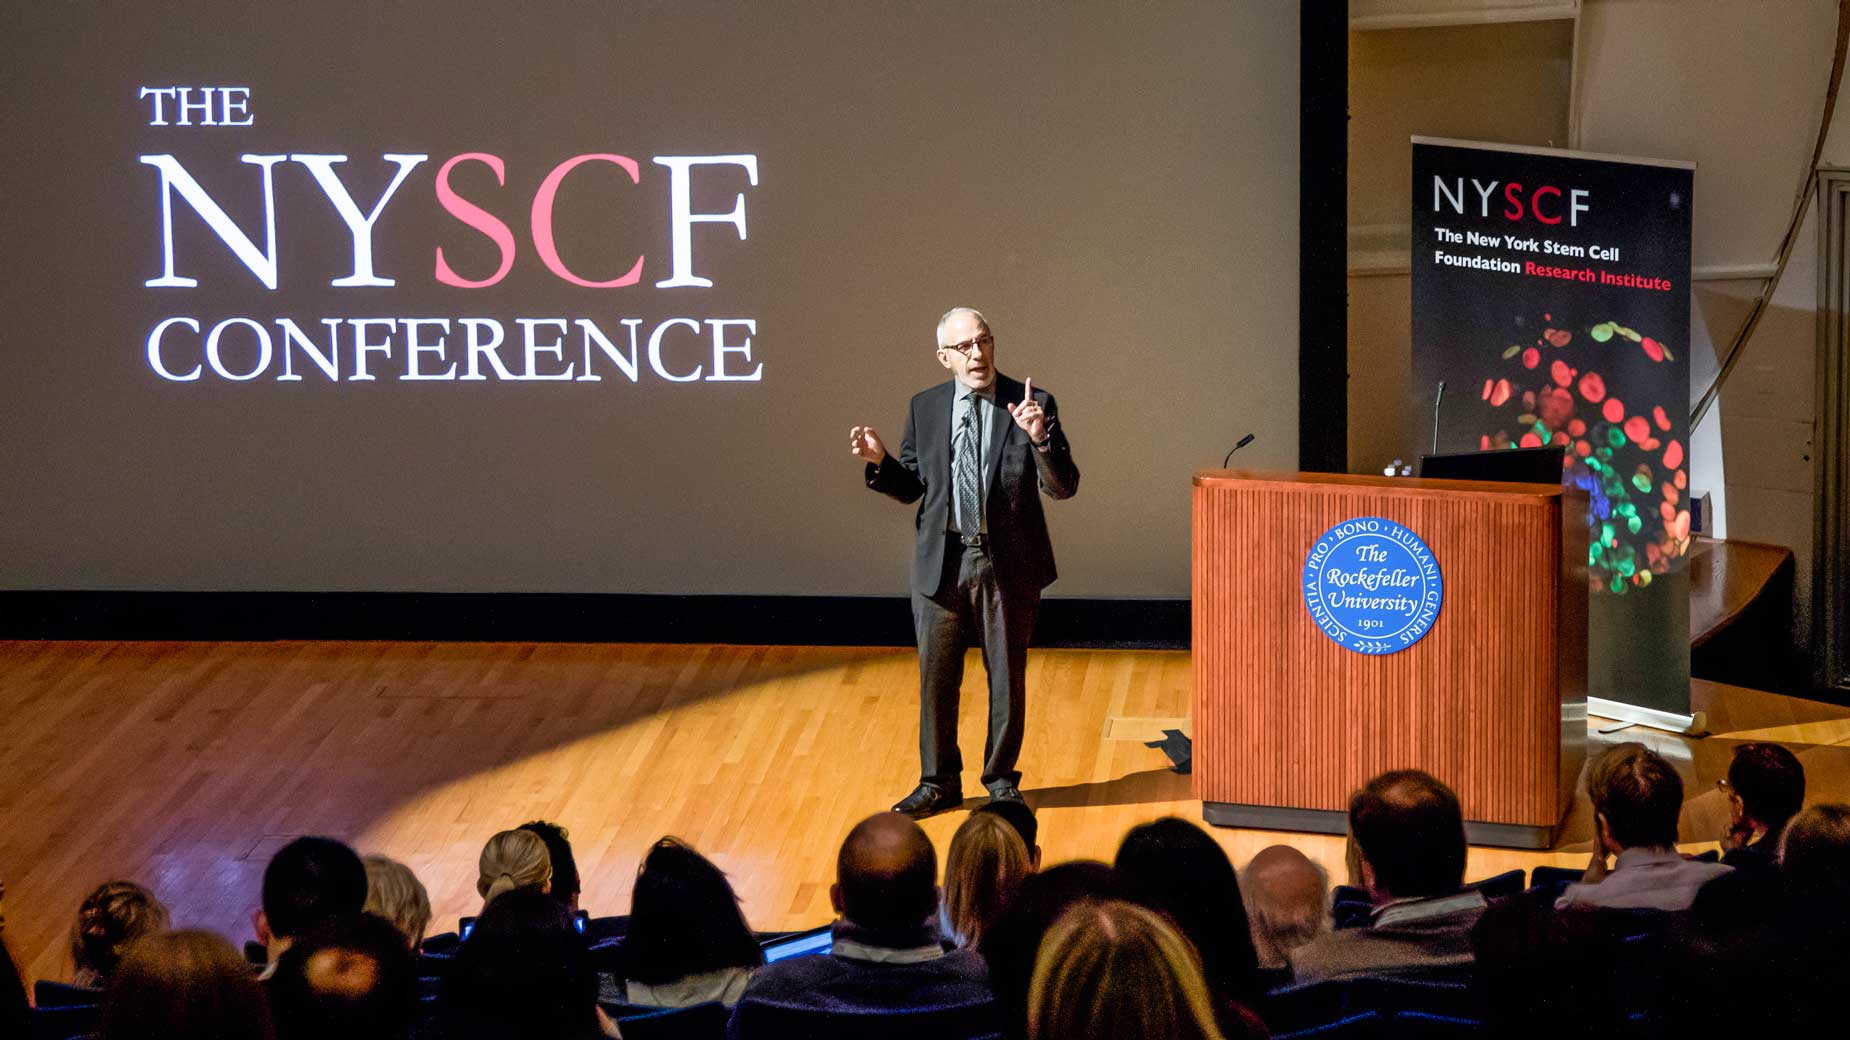 The NYSCF Conference New York Stem Cell Foundation